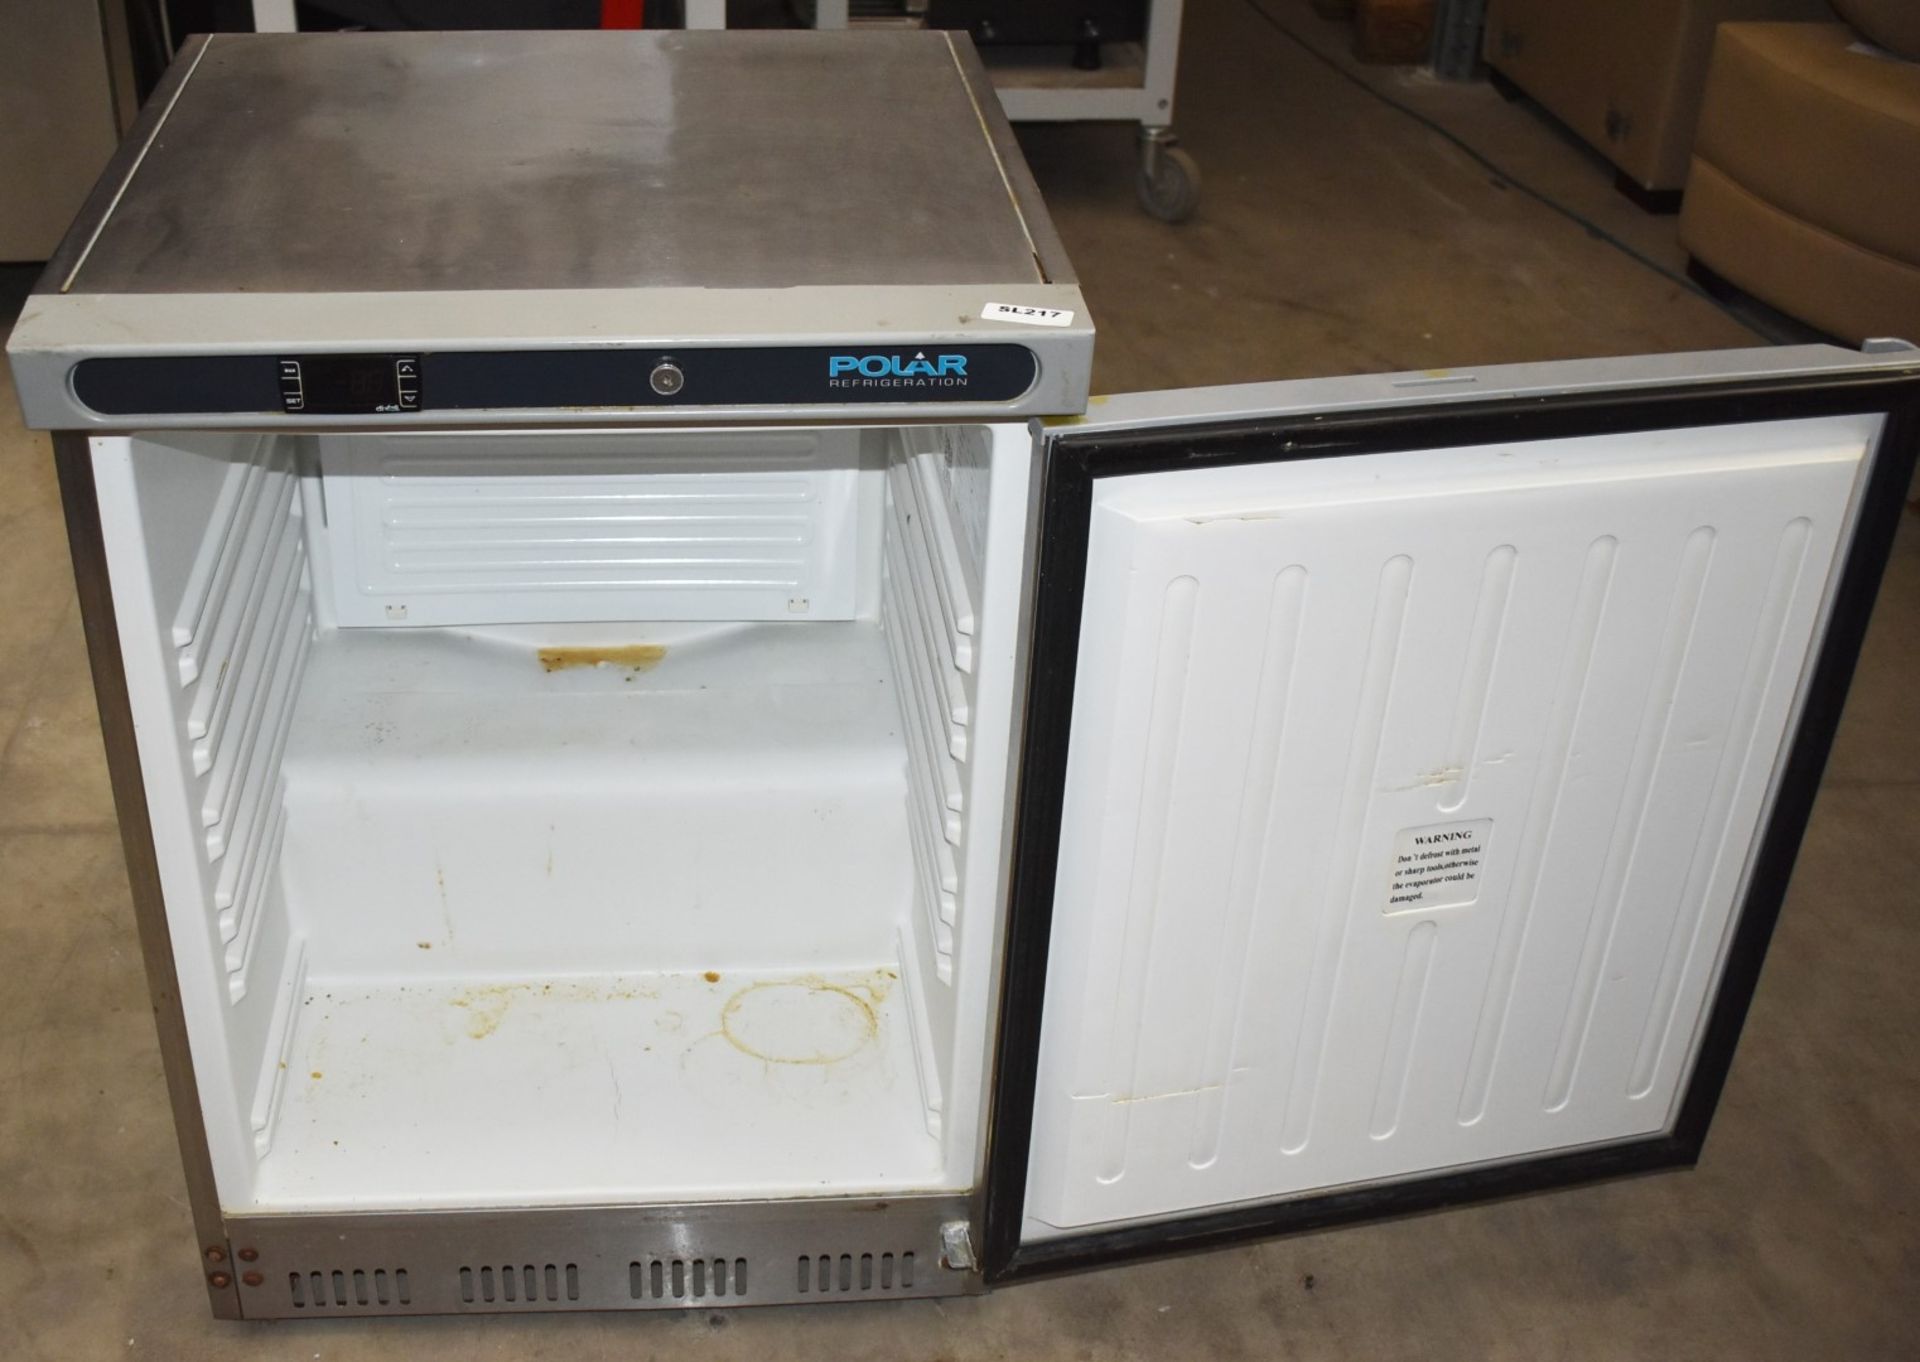 1 x Polar CD080 Undercounter Stainless Steel Fridge - Recently Removed From a Restaurant Environment - Image 4 of 7